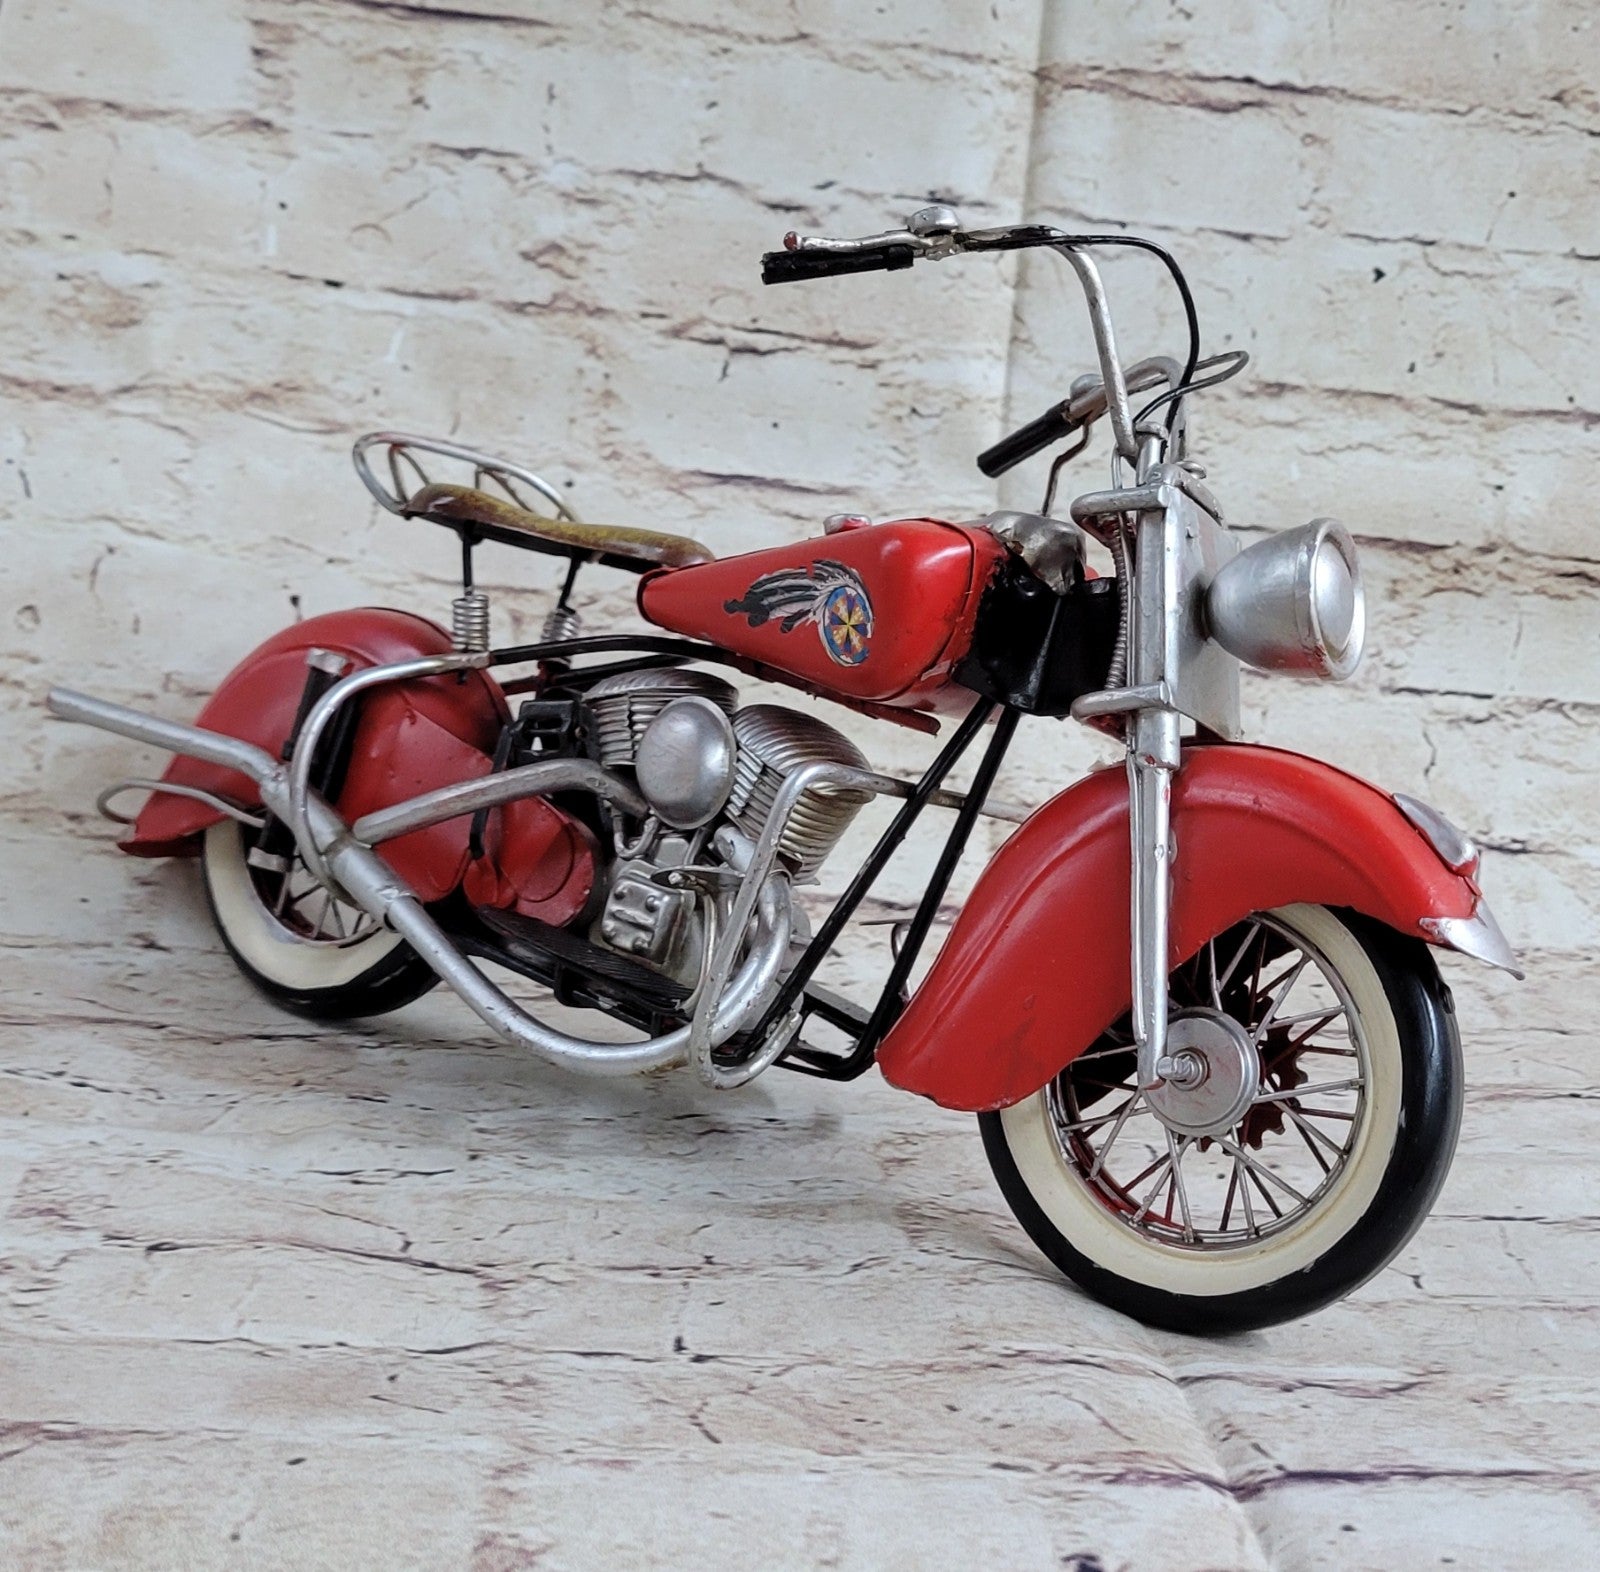 1945 RED HARLEY-DAVIDSON 1:8-SCALE Detailed Handcrafted Motorcycle Decoration